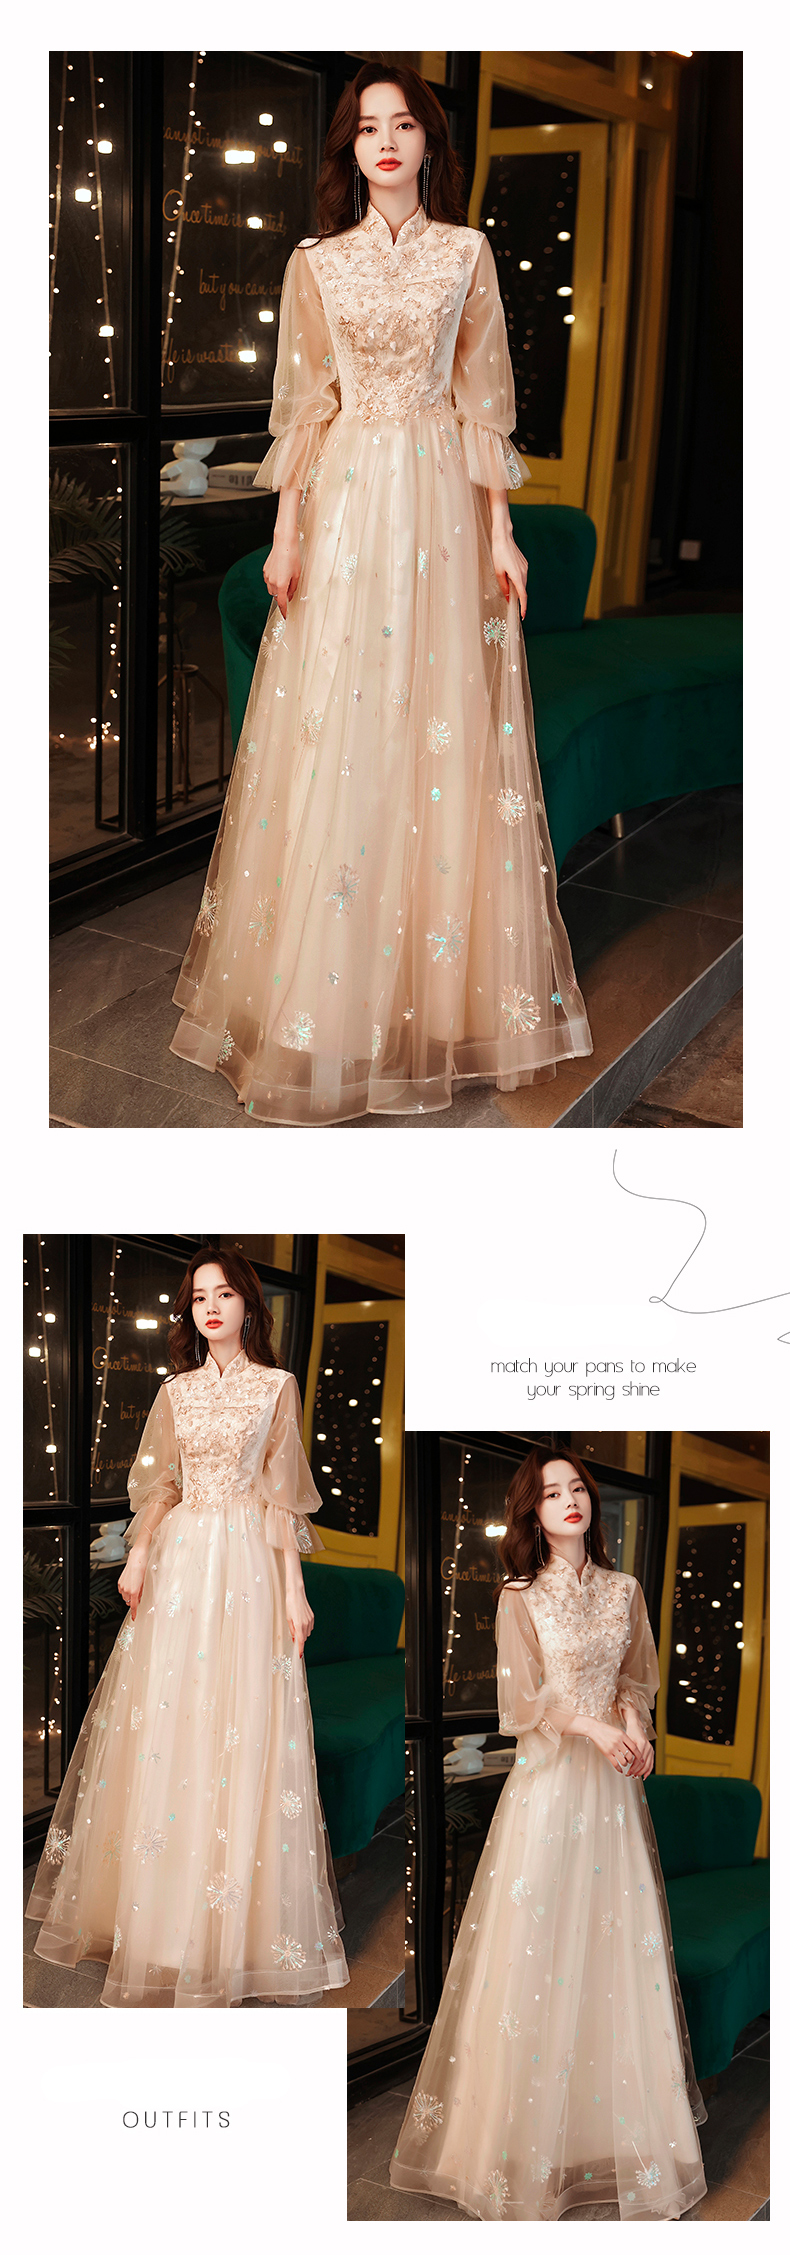 New Style Fashion and Elegant Floral Prom Dresse11